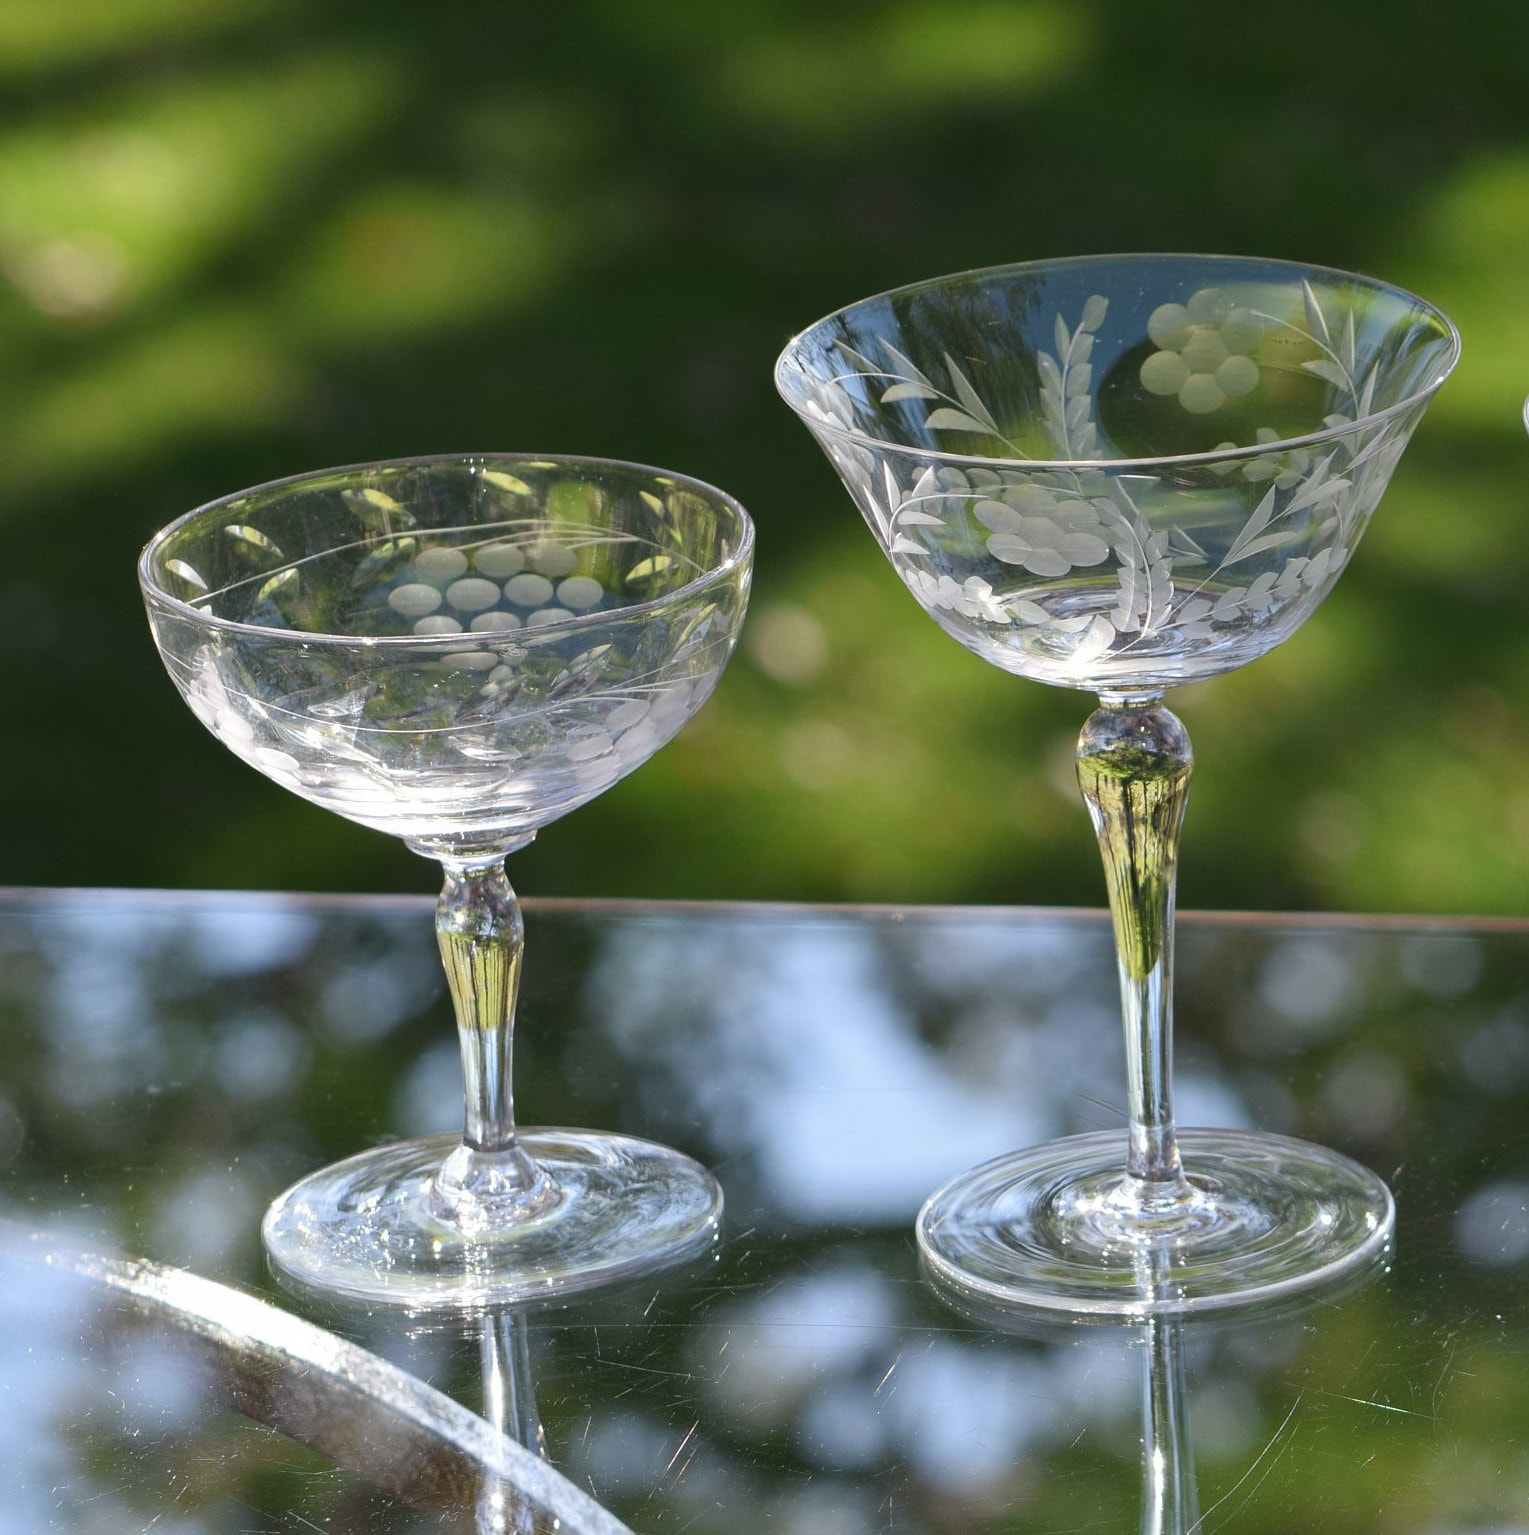 ROXBURGH Martini Glasses | Vintage Art Deco Crystal Champagne Coupe Glasses  Set of 4 with 4 Cocktail…See more ROXBURGH Martini Glasses | Vintage Art